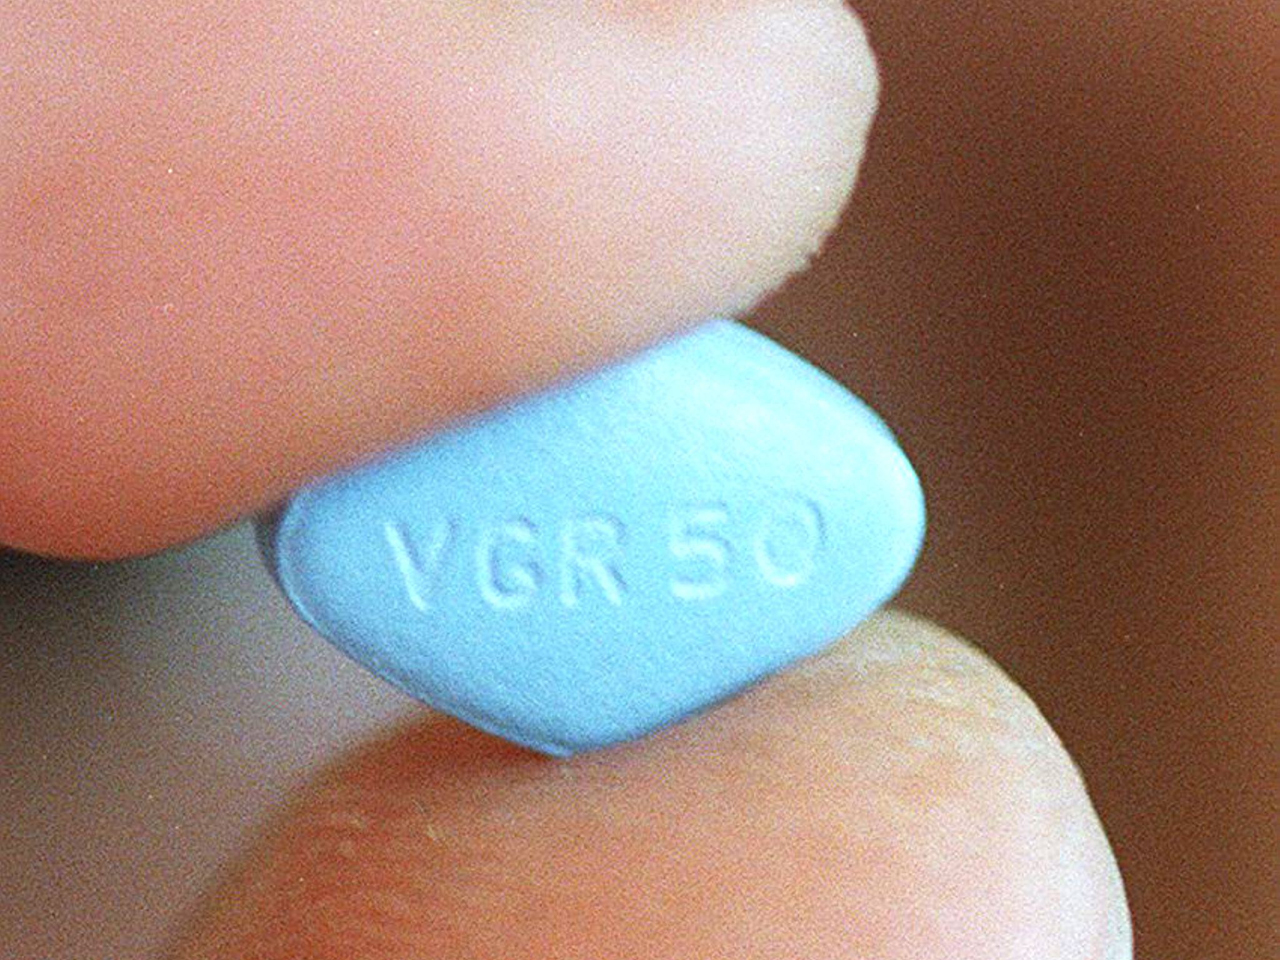 Sexual dysfunction drugs Viagra, Cialis, Addyi can cost hundreds of dollars a month pic